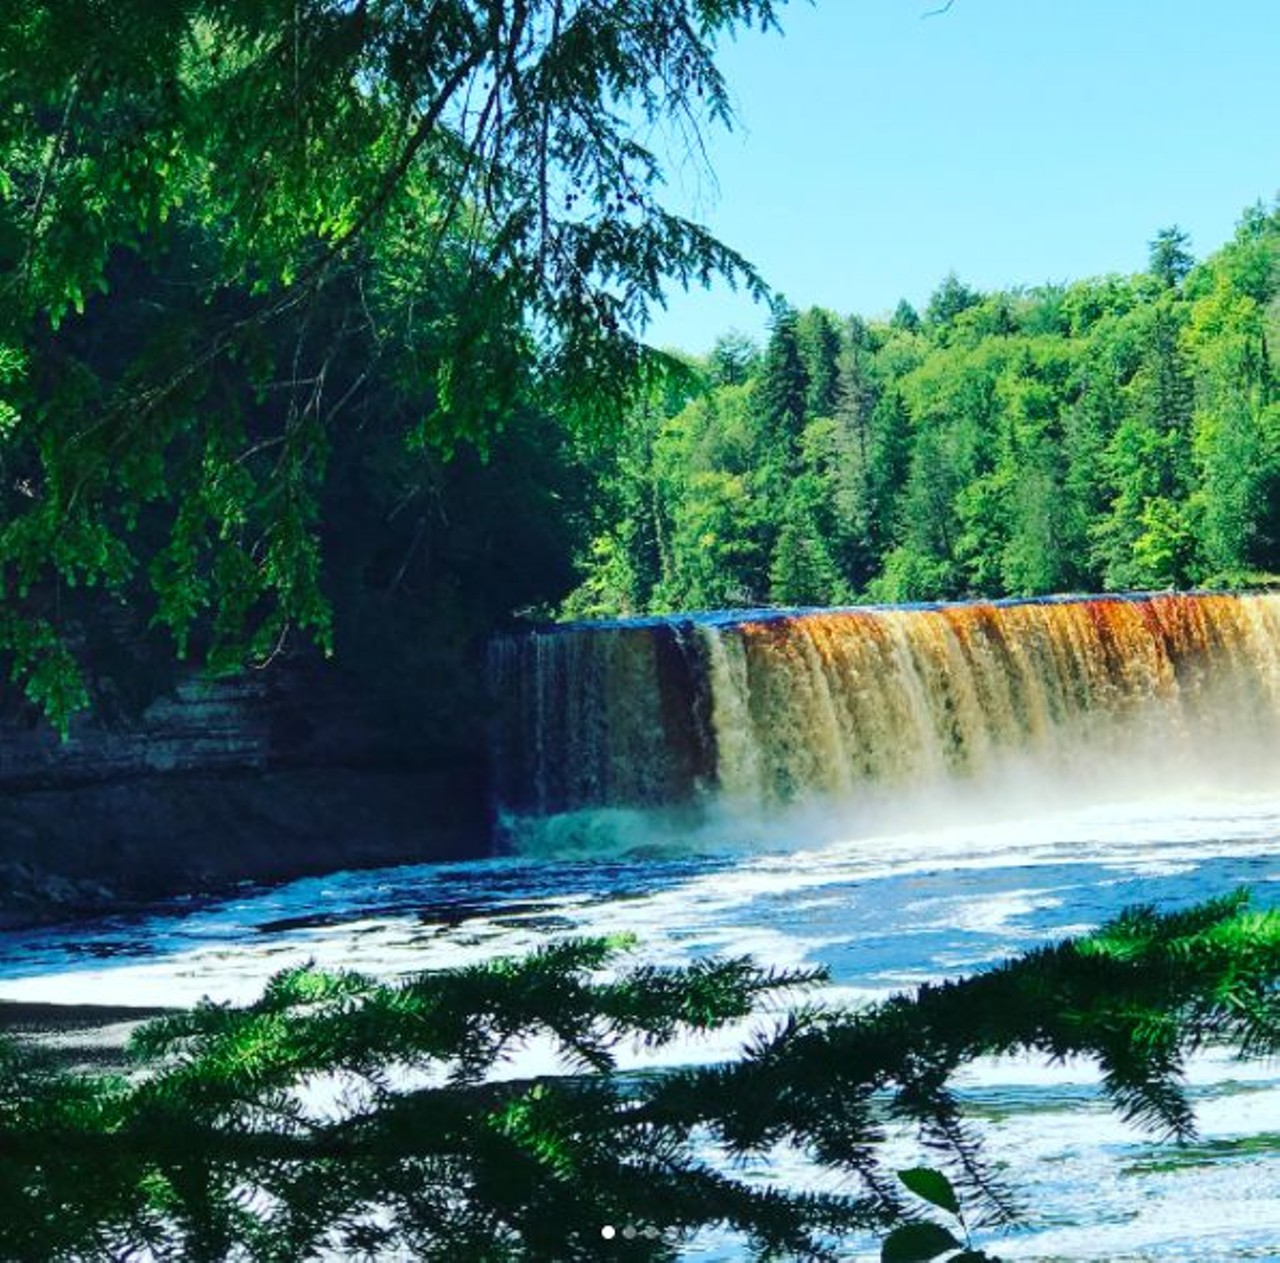 Tahquamenon Falls Paradise 
We know, we know: Everyone and their mother has told you to take this trip, but why not take their advice? With hiking trails of varying difficulties and camping sites abound, there&#146;s no reason not to finally make the Tahquamenon Trek (can we trademark that?).
Photo via IG user @kawainanda